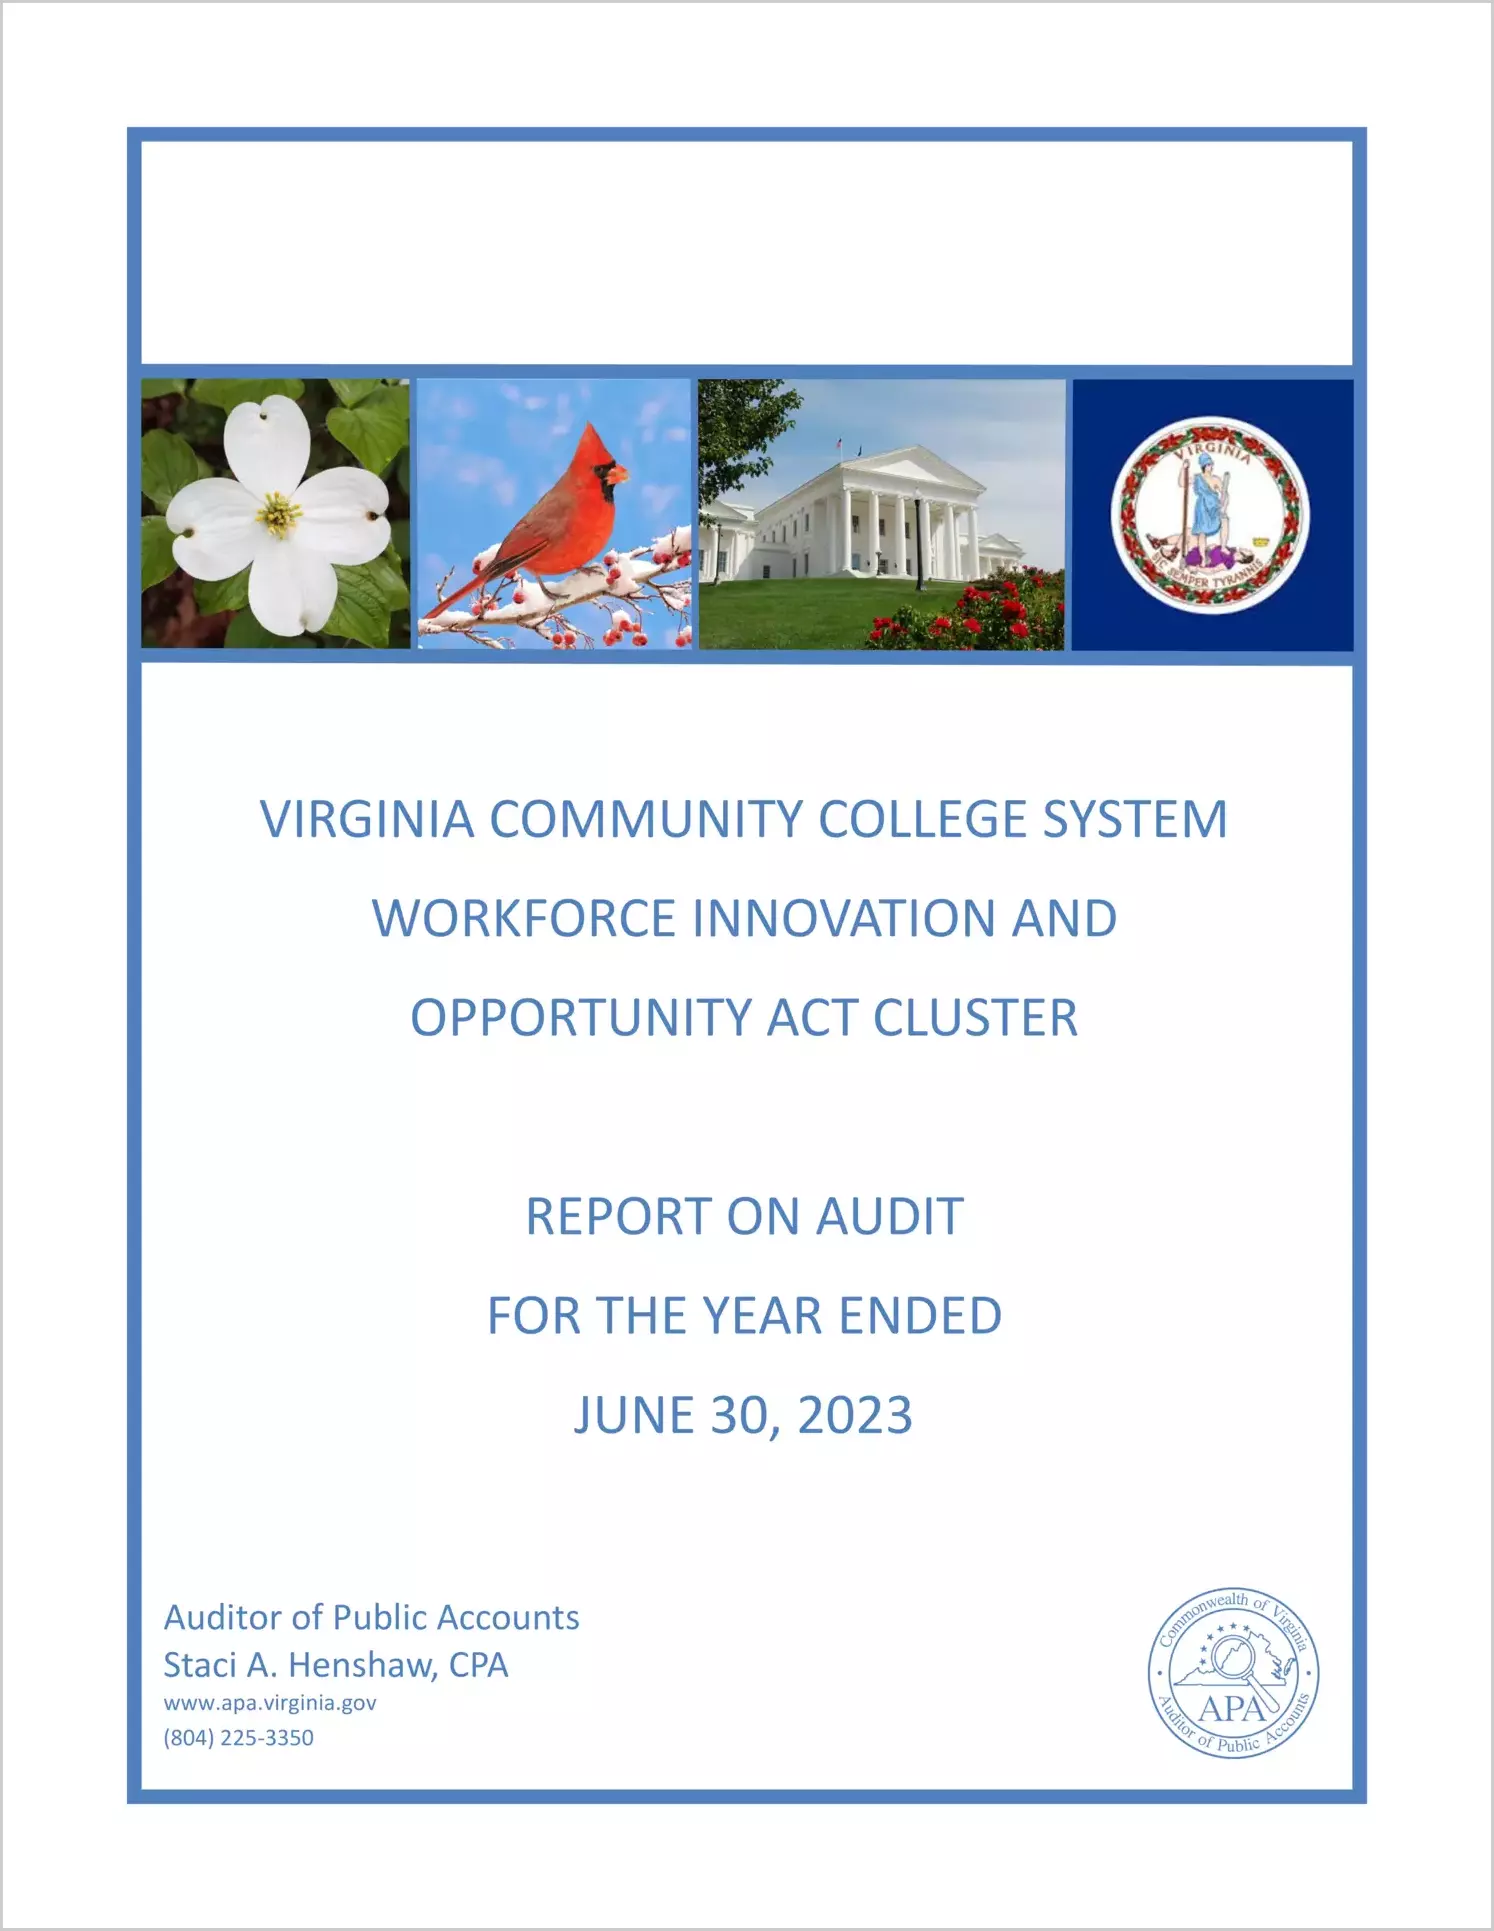 Virginia Community College System Workforce Innovation and Opportunity Act Cluster for the year ended June 30, 2023